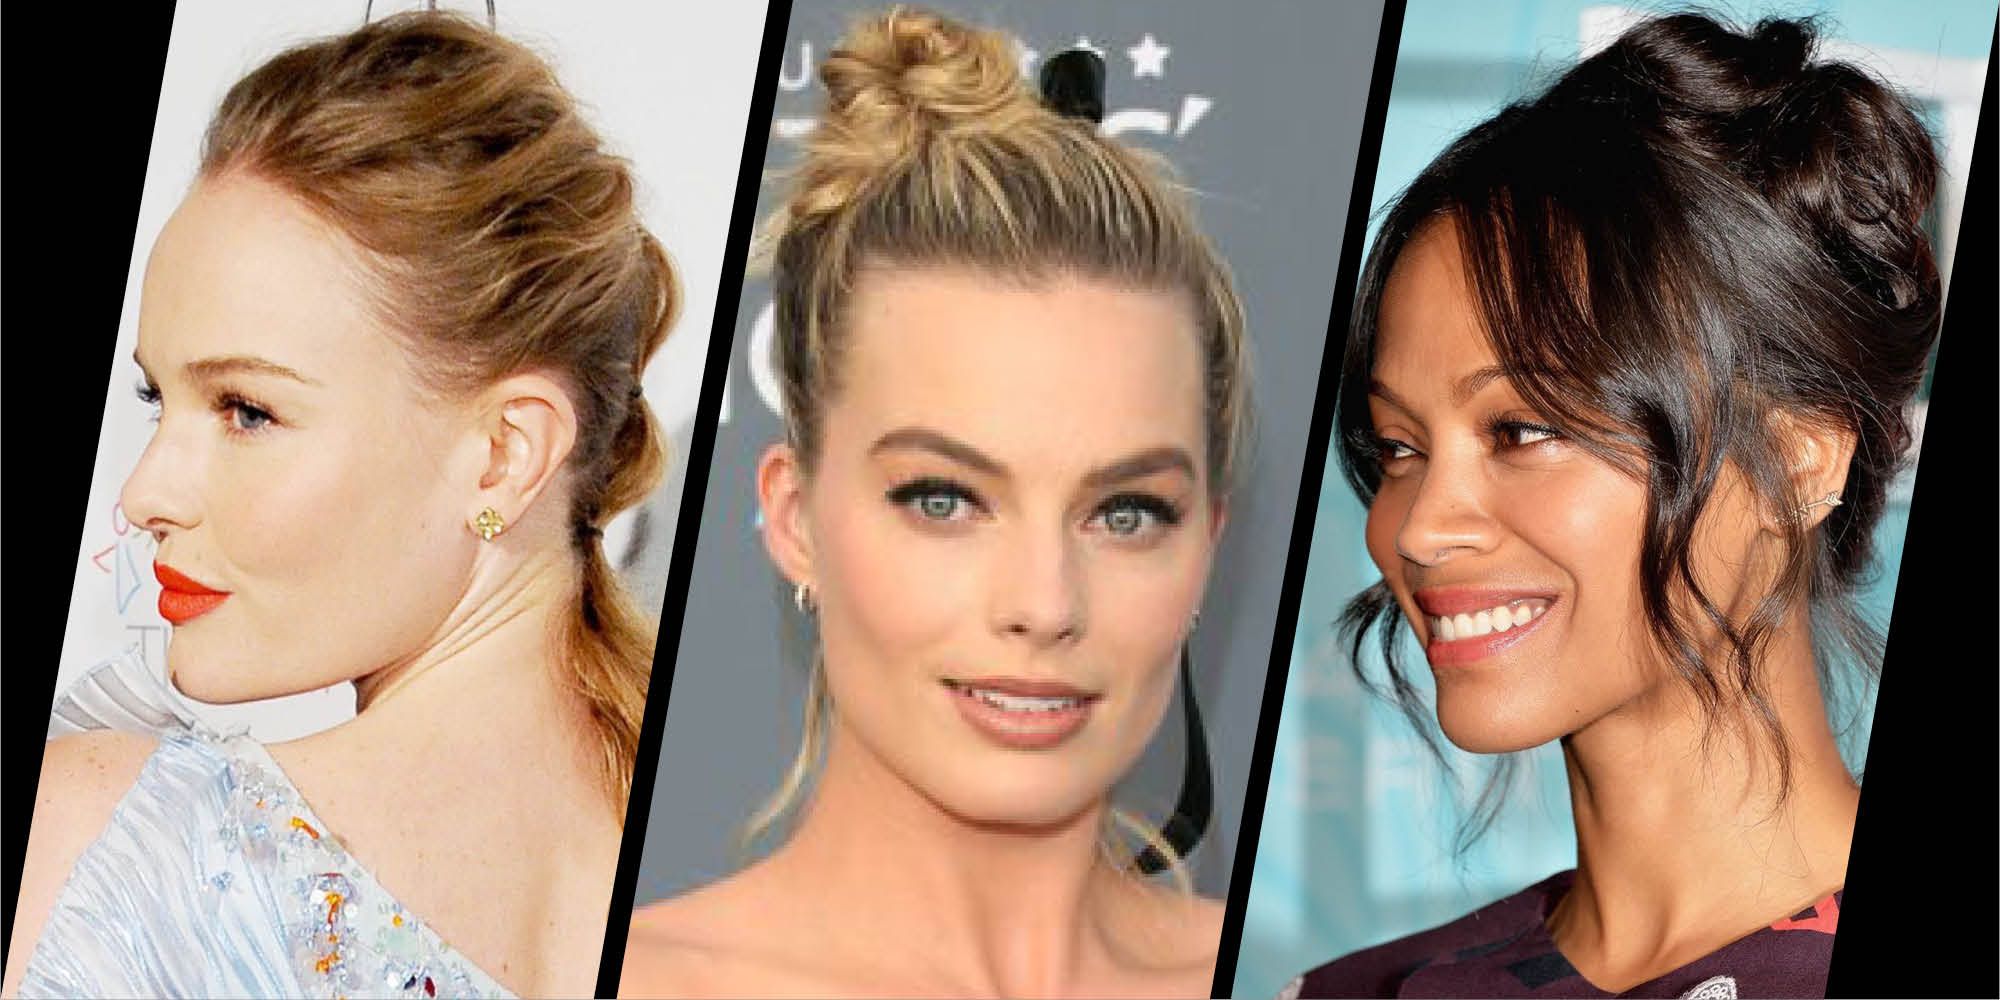 Hot weather hairstyles - Celebrity hair inspiration for summer